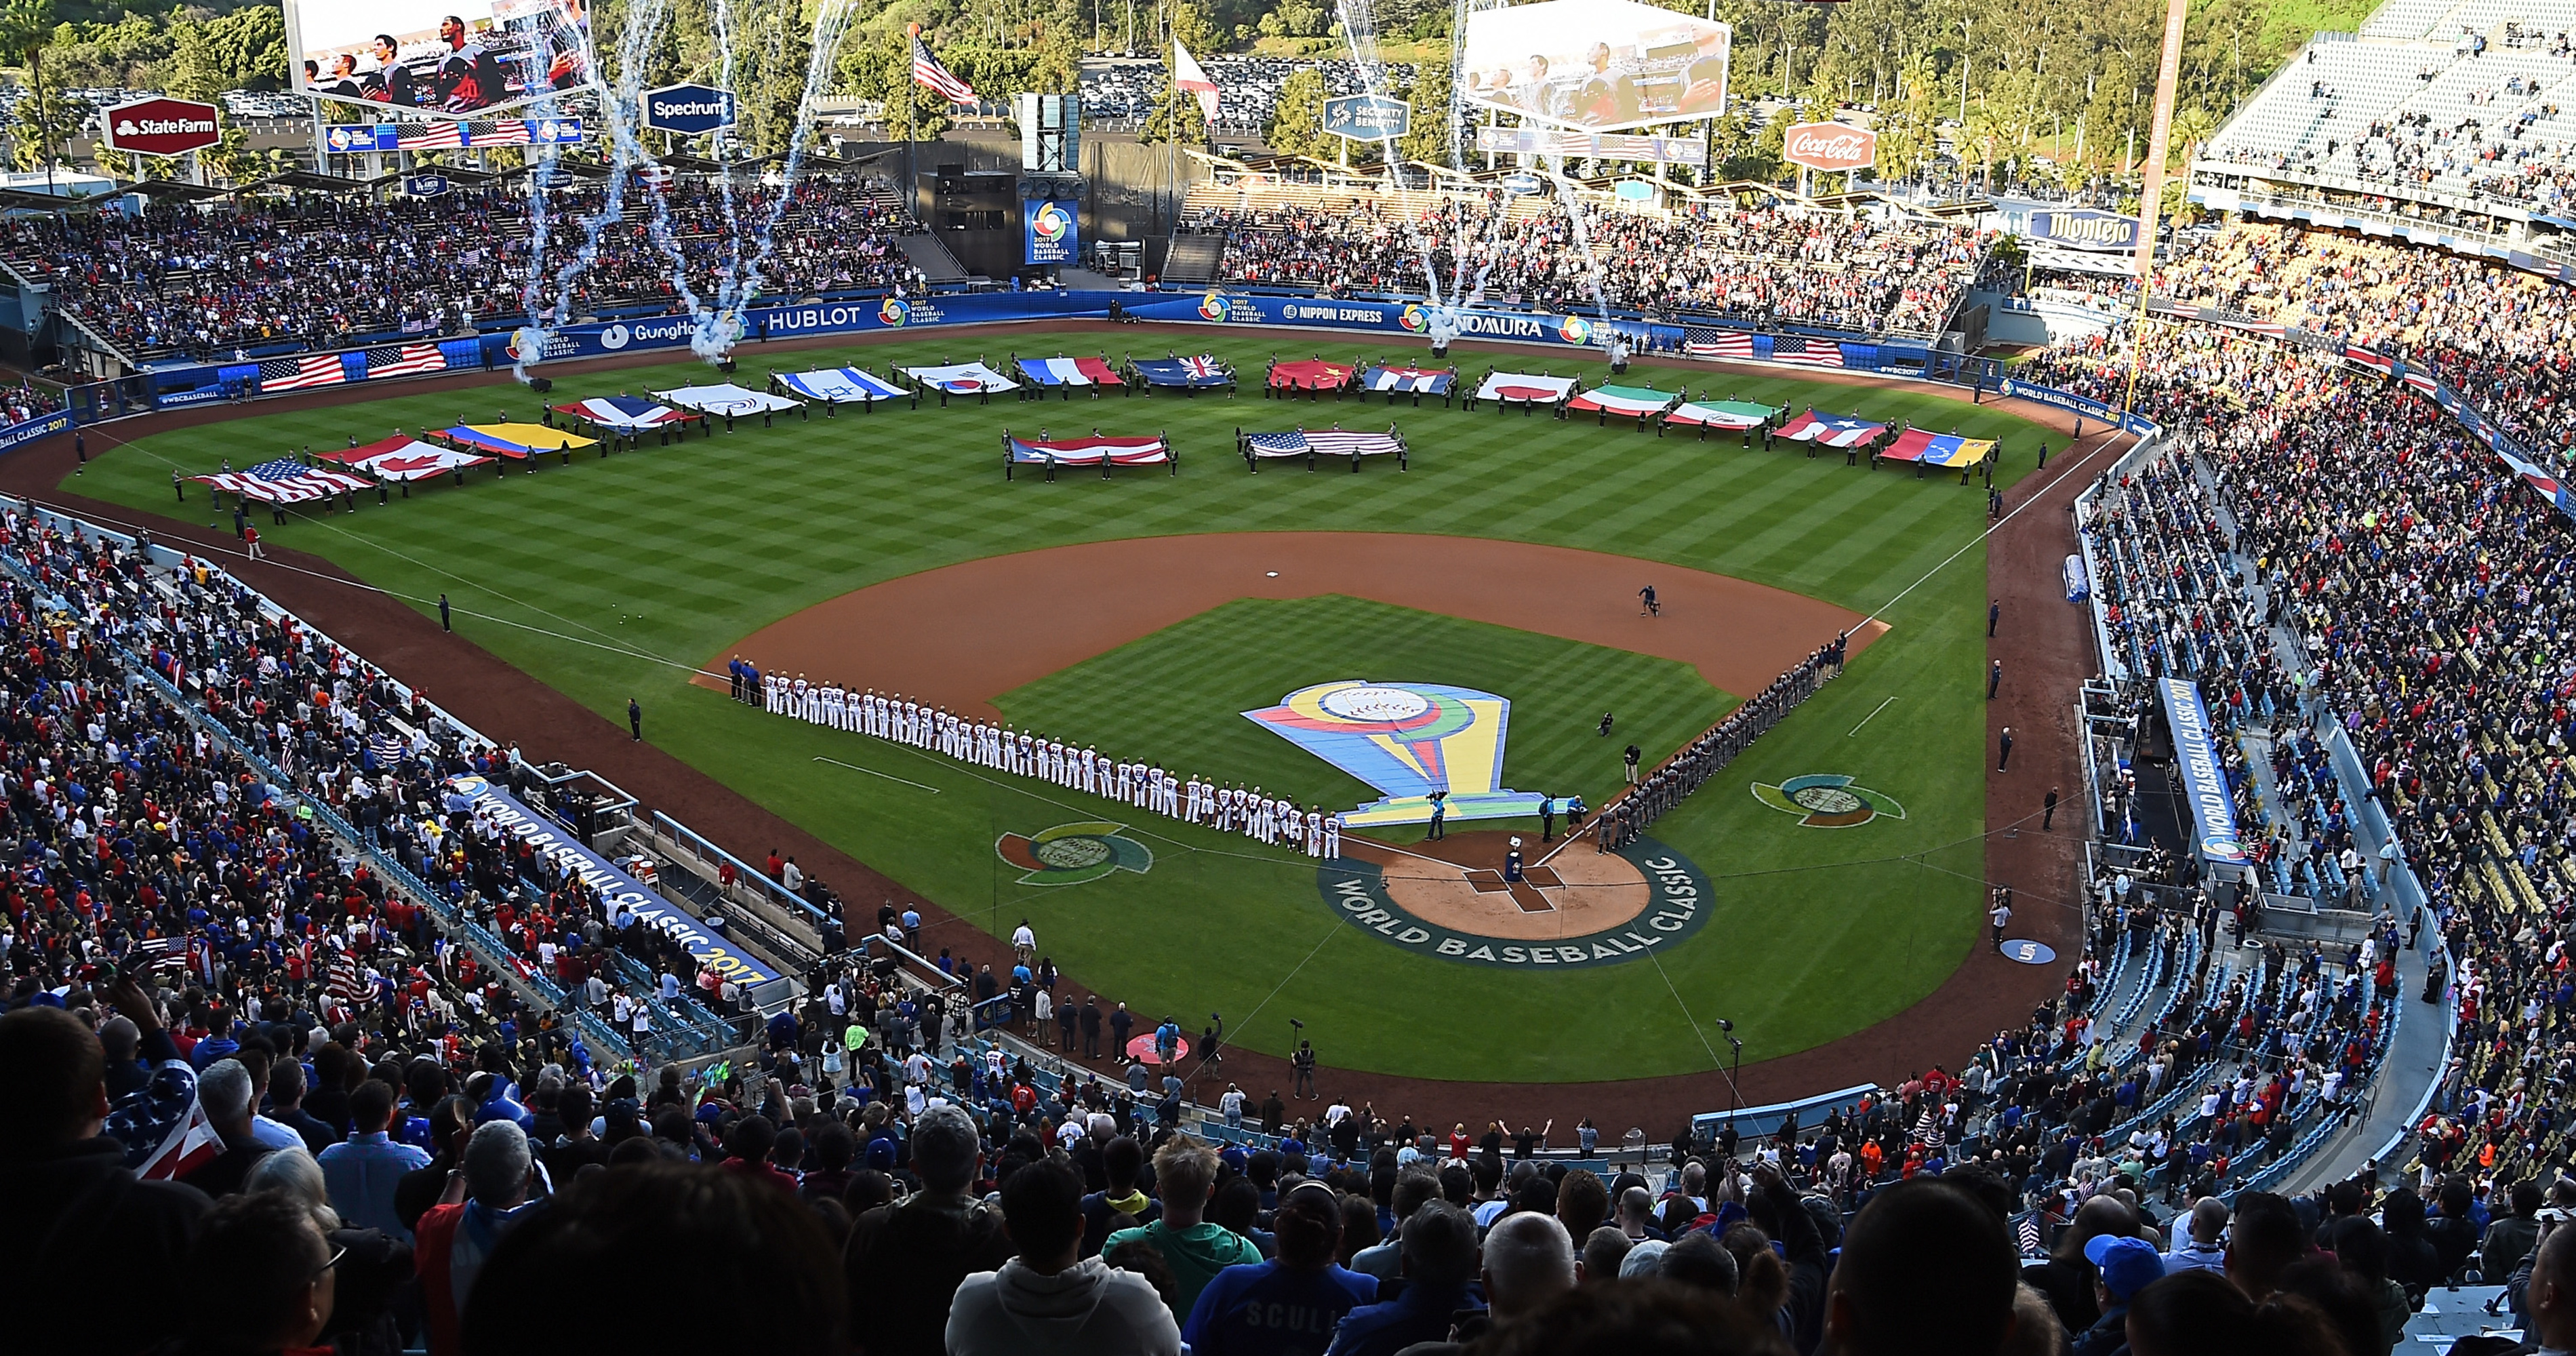 MLB News: 2023 World Baseball Classic: Schedule, rosters and locations